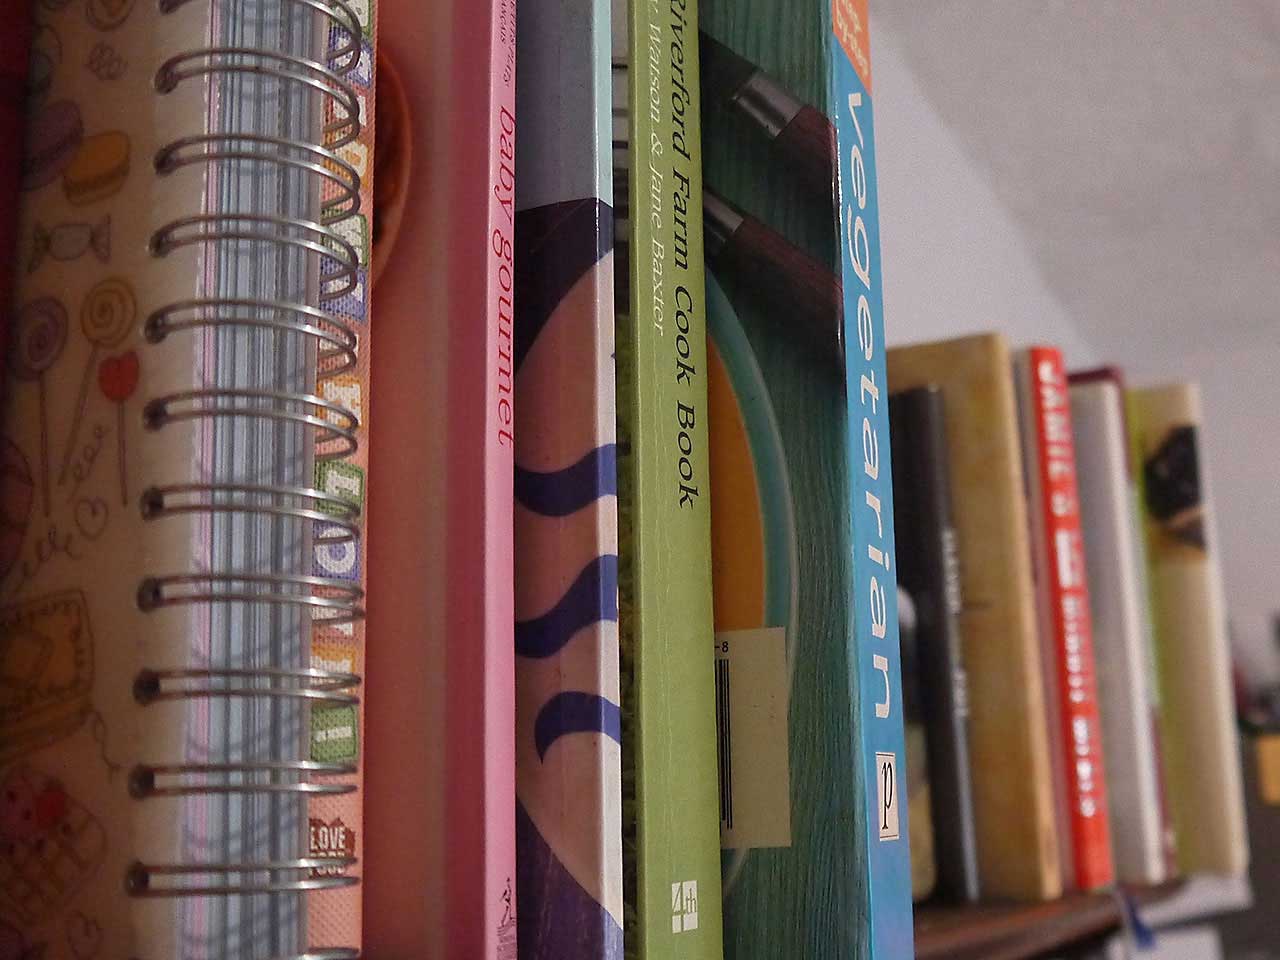 Cookery books on a shelf in the kitchen